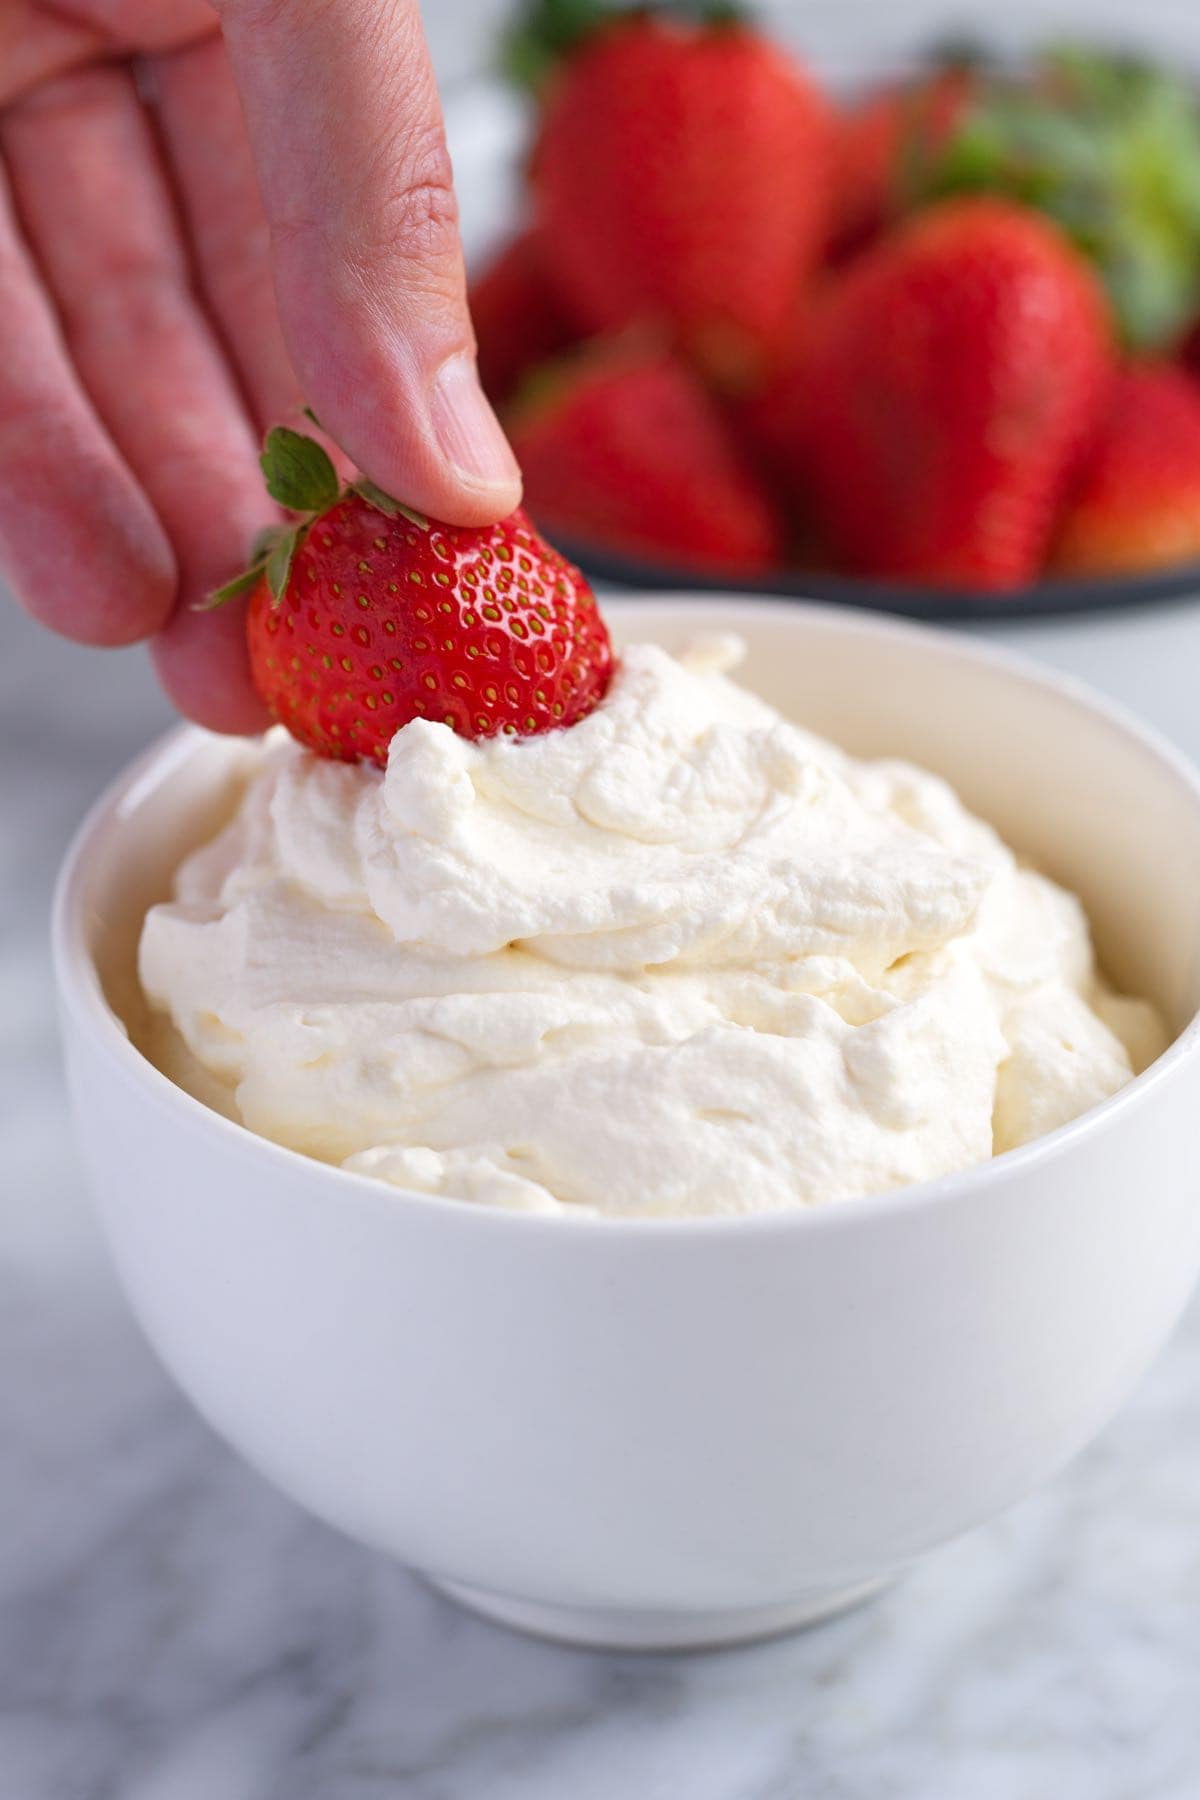 Dipping a strawberry into homemade whipped cream